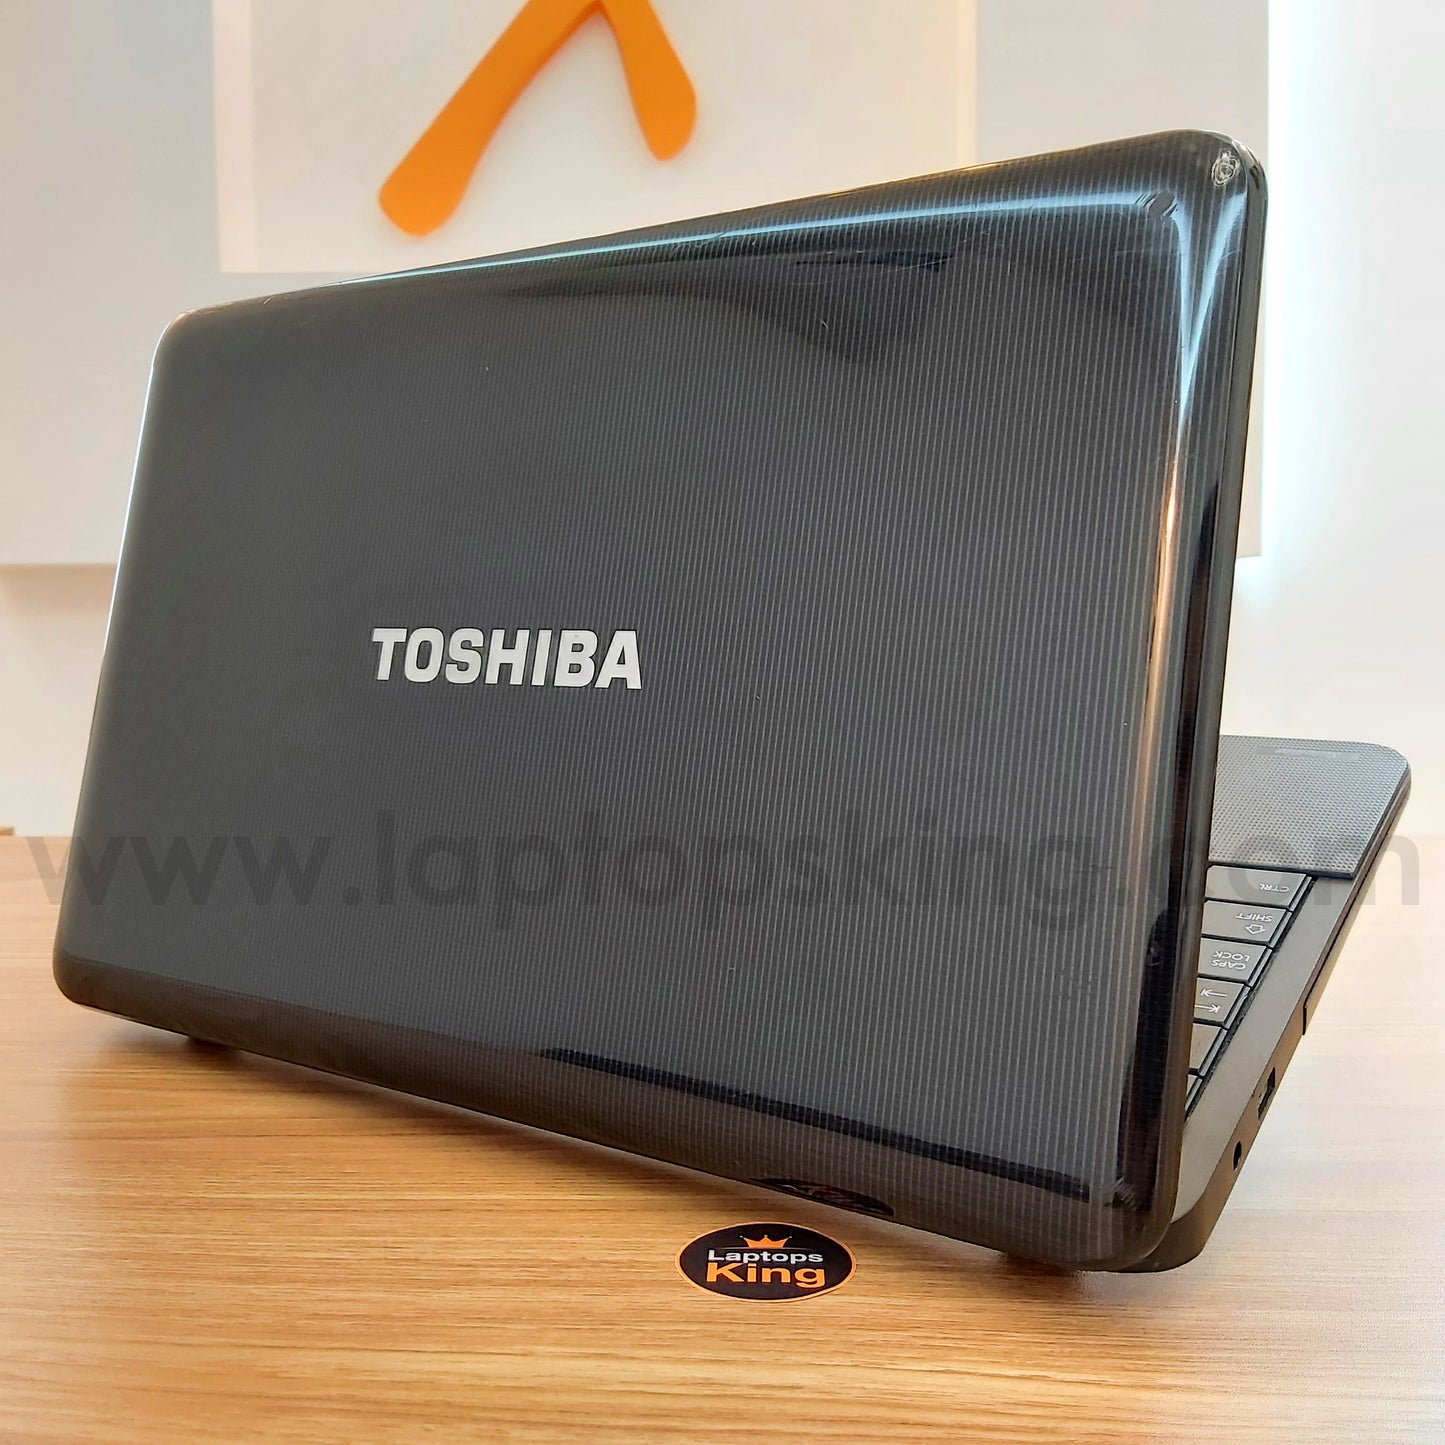 Toshiba Satellite C870-D7K Core i7 15.6" Laptop (Used Very Clean)